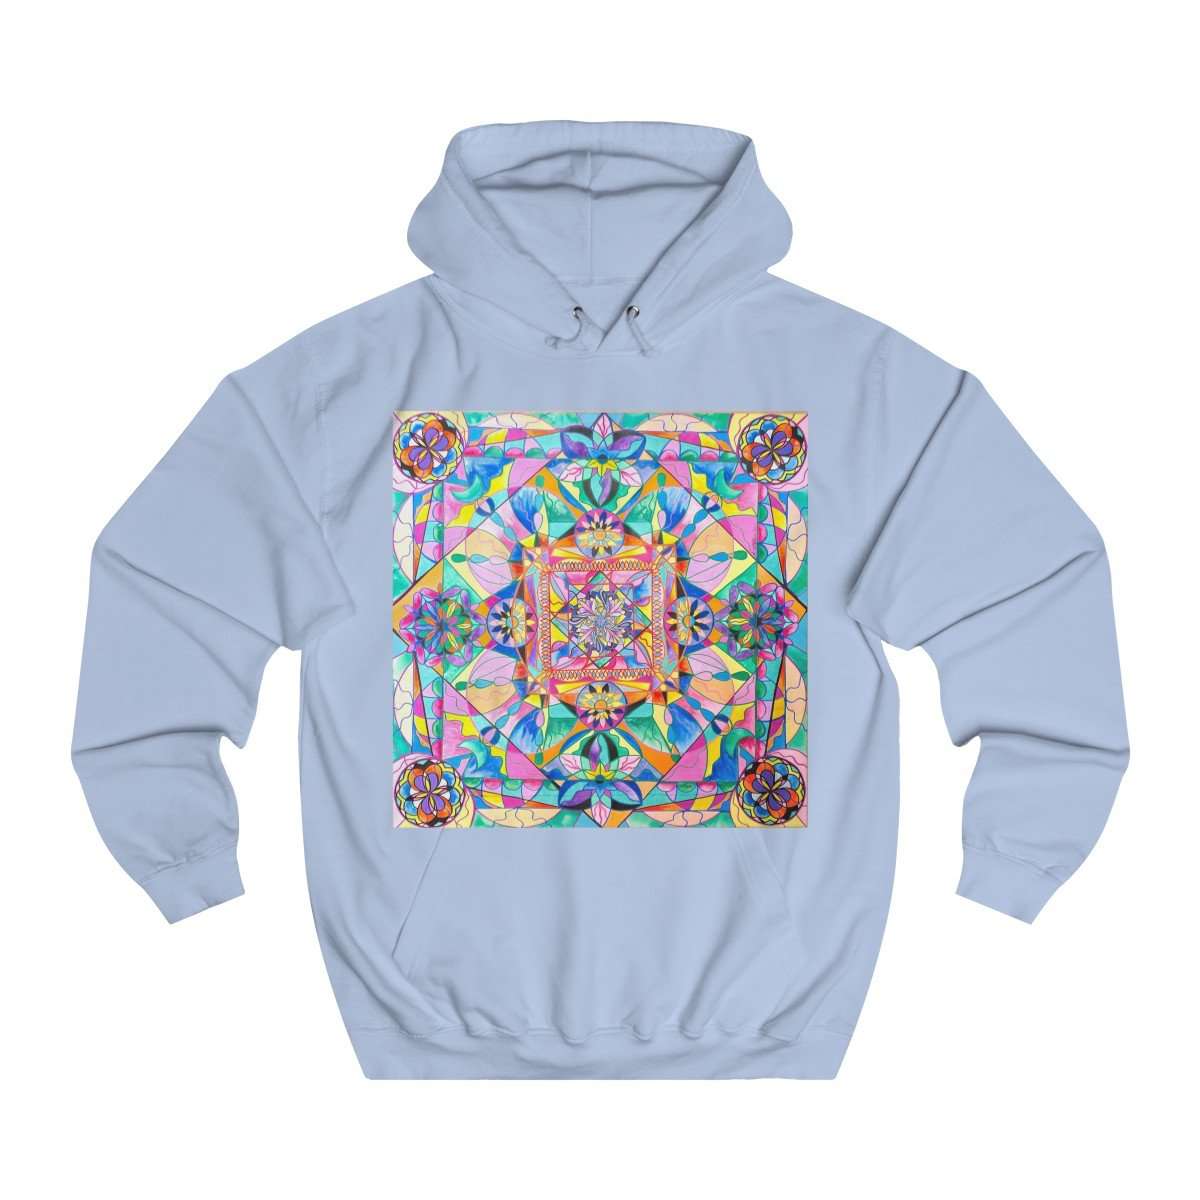 the-most-stylish-and-affordable-renewal-unisex-college-hoodie-hot-on-sale_7.jpg